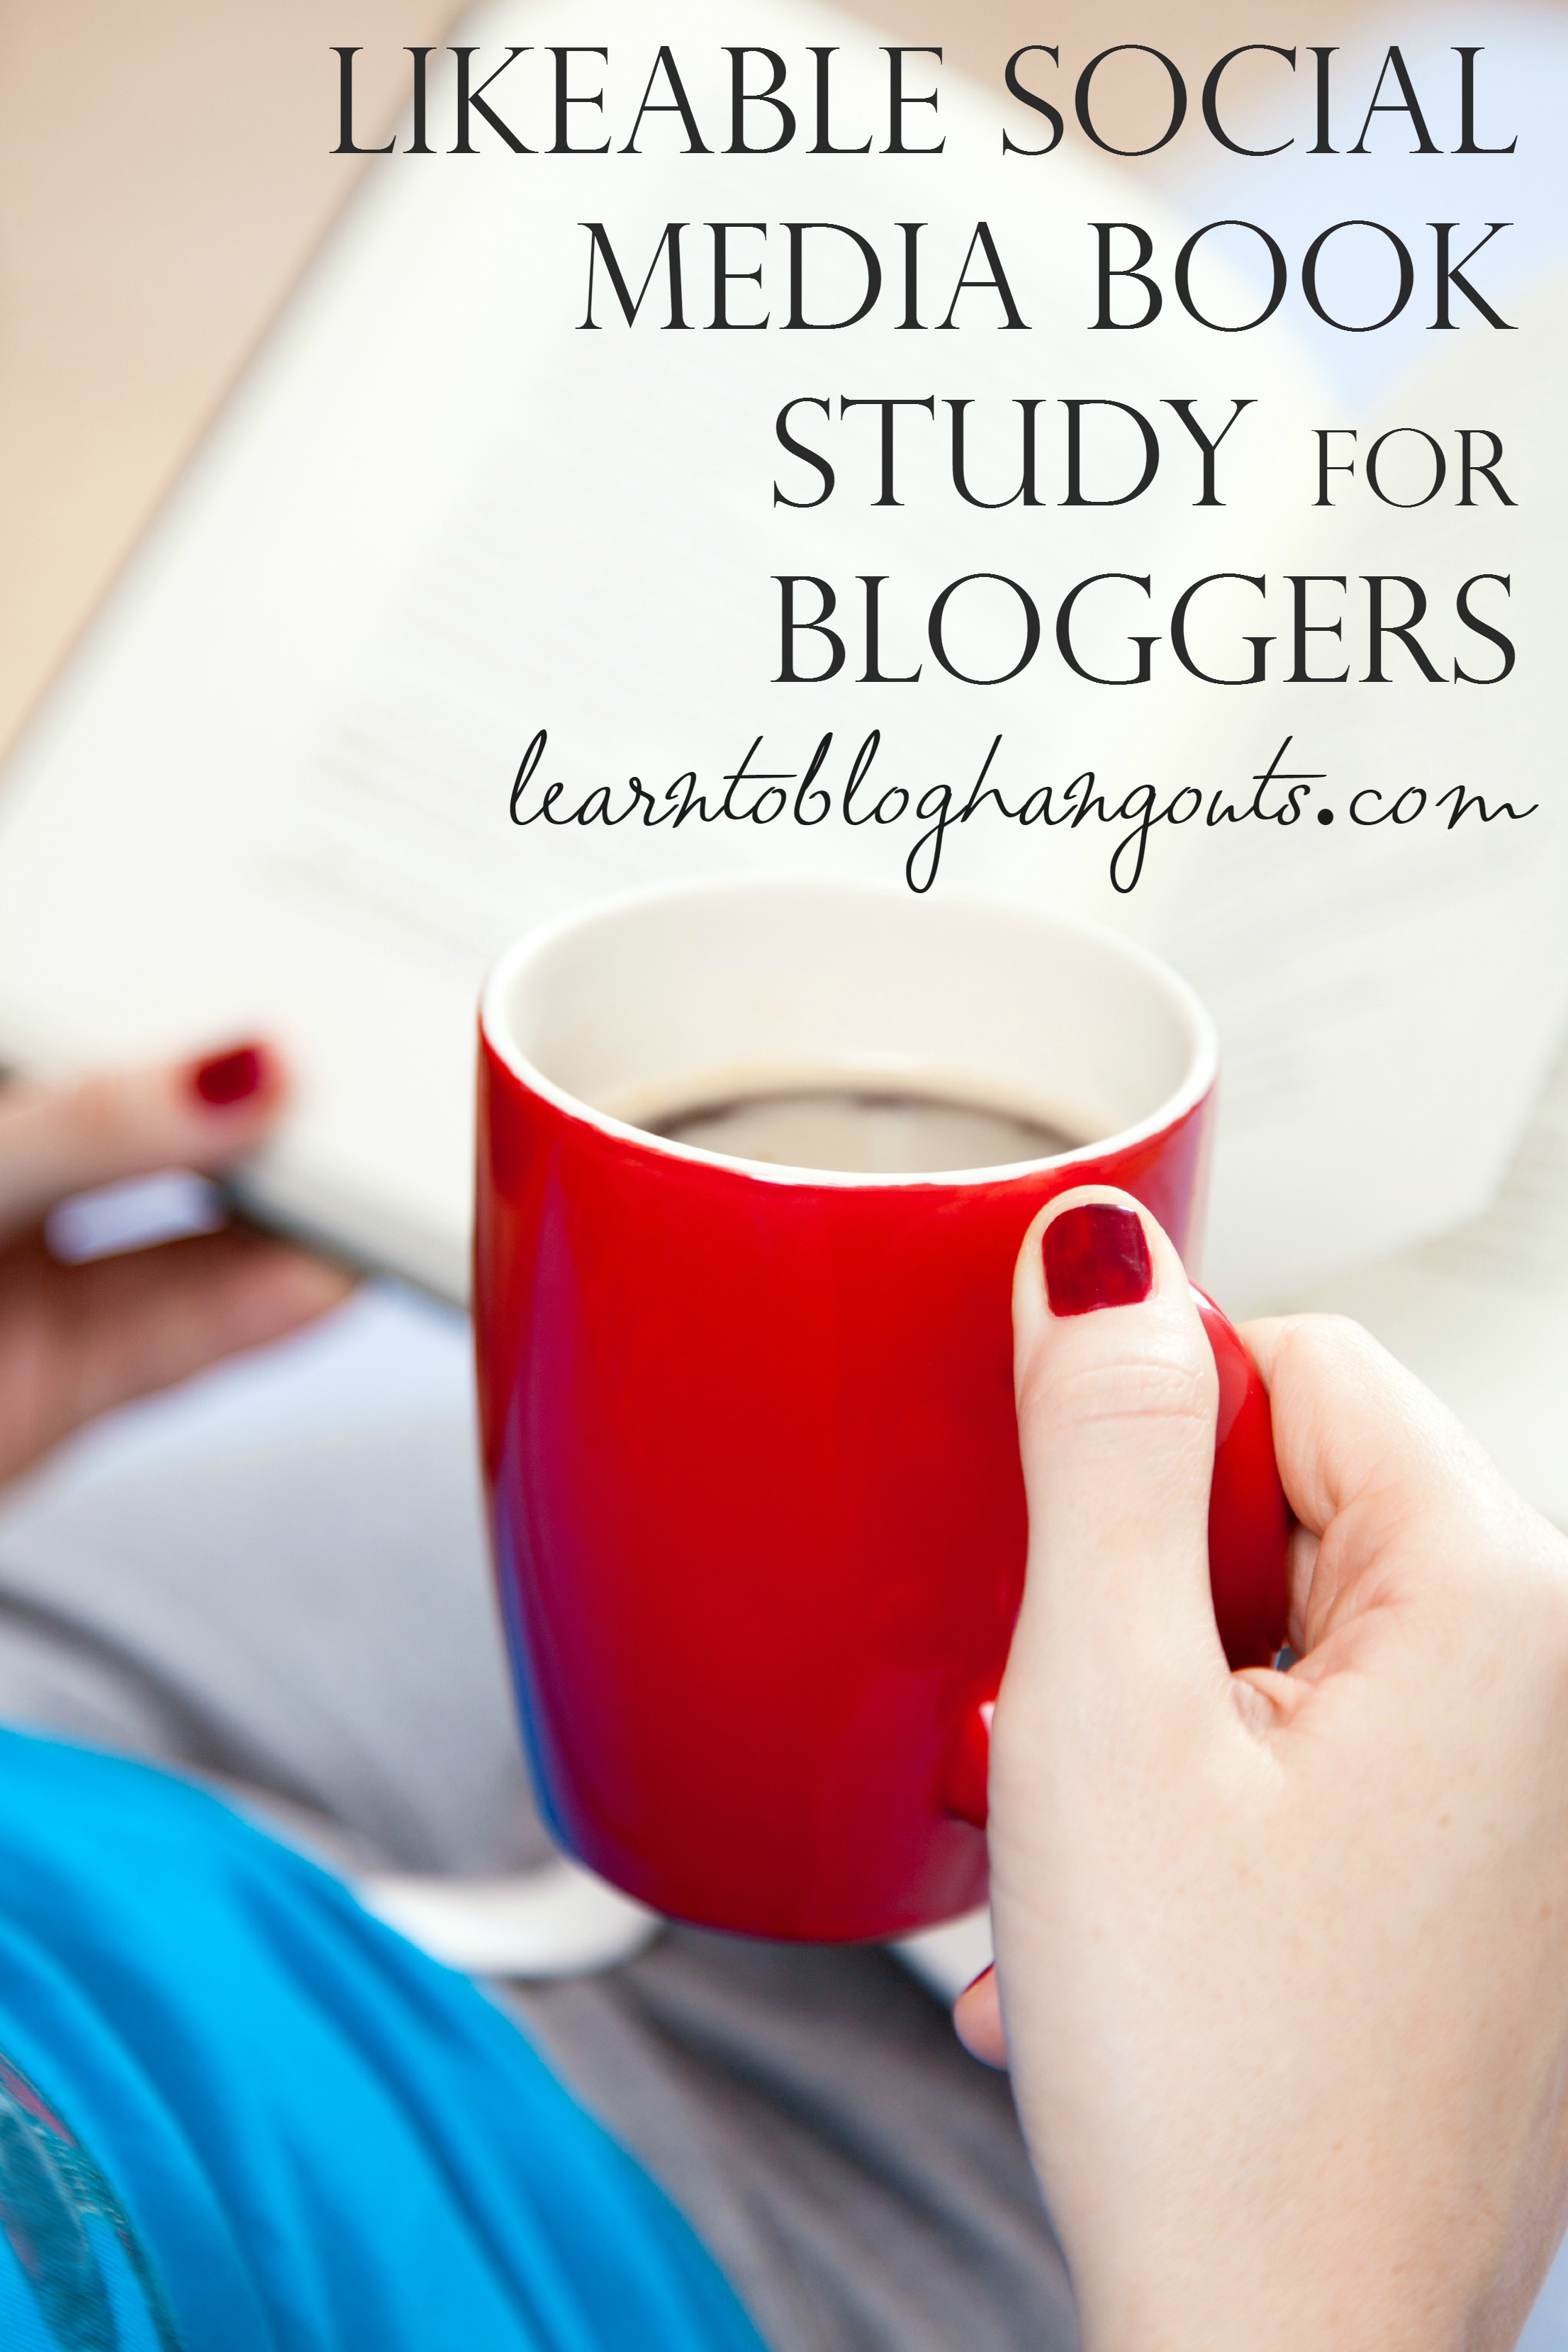 likeable social media book study for bloggers